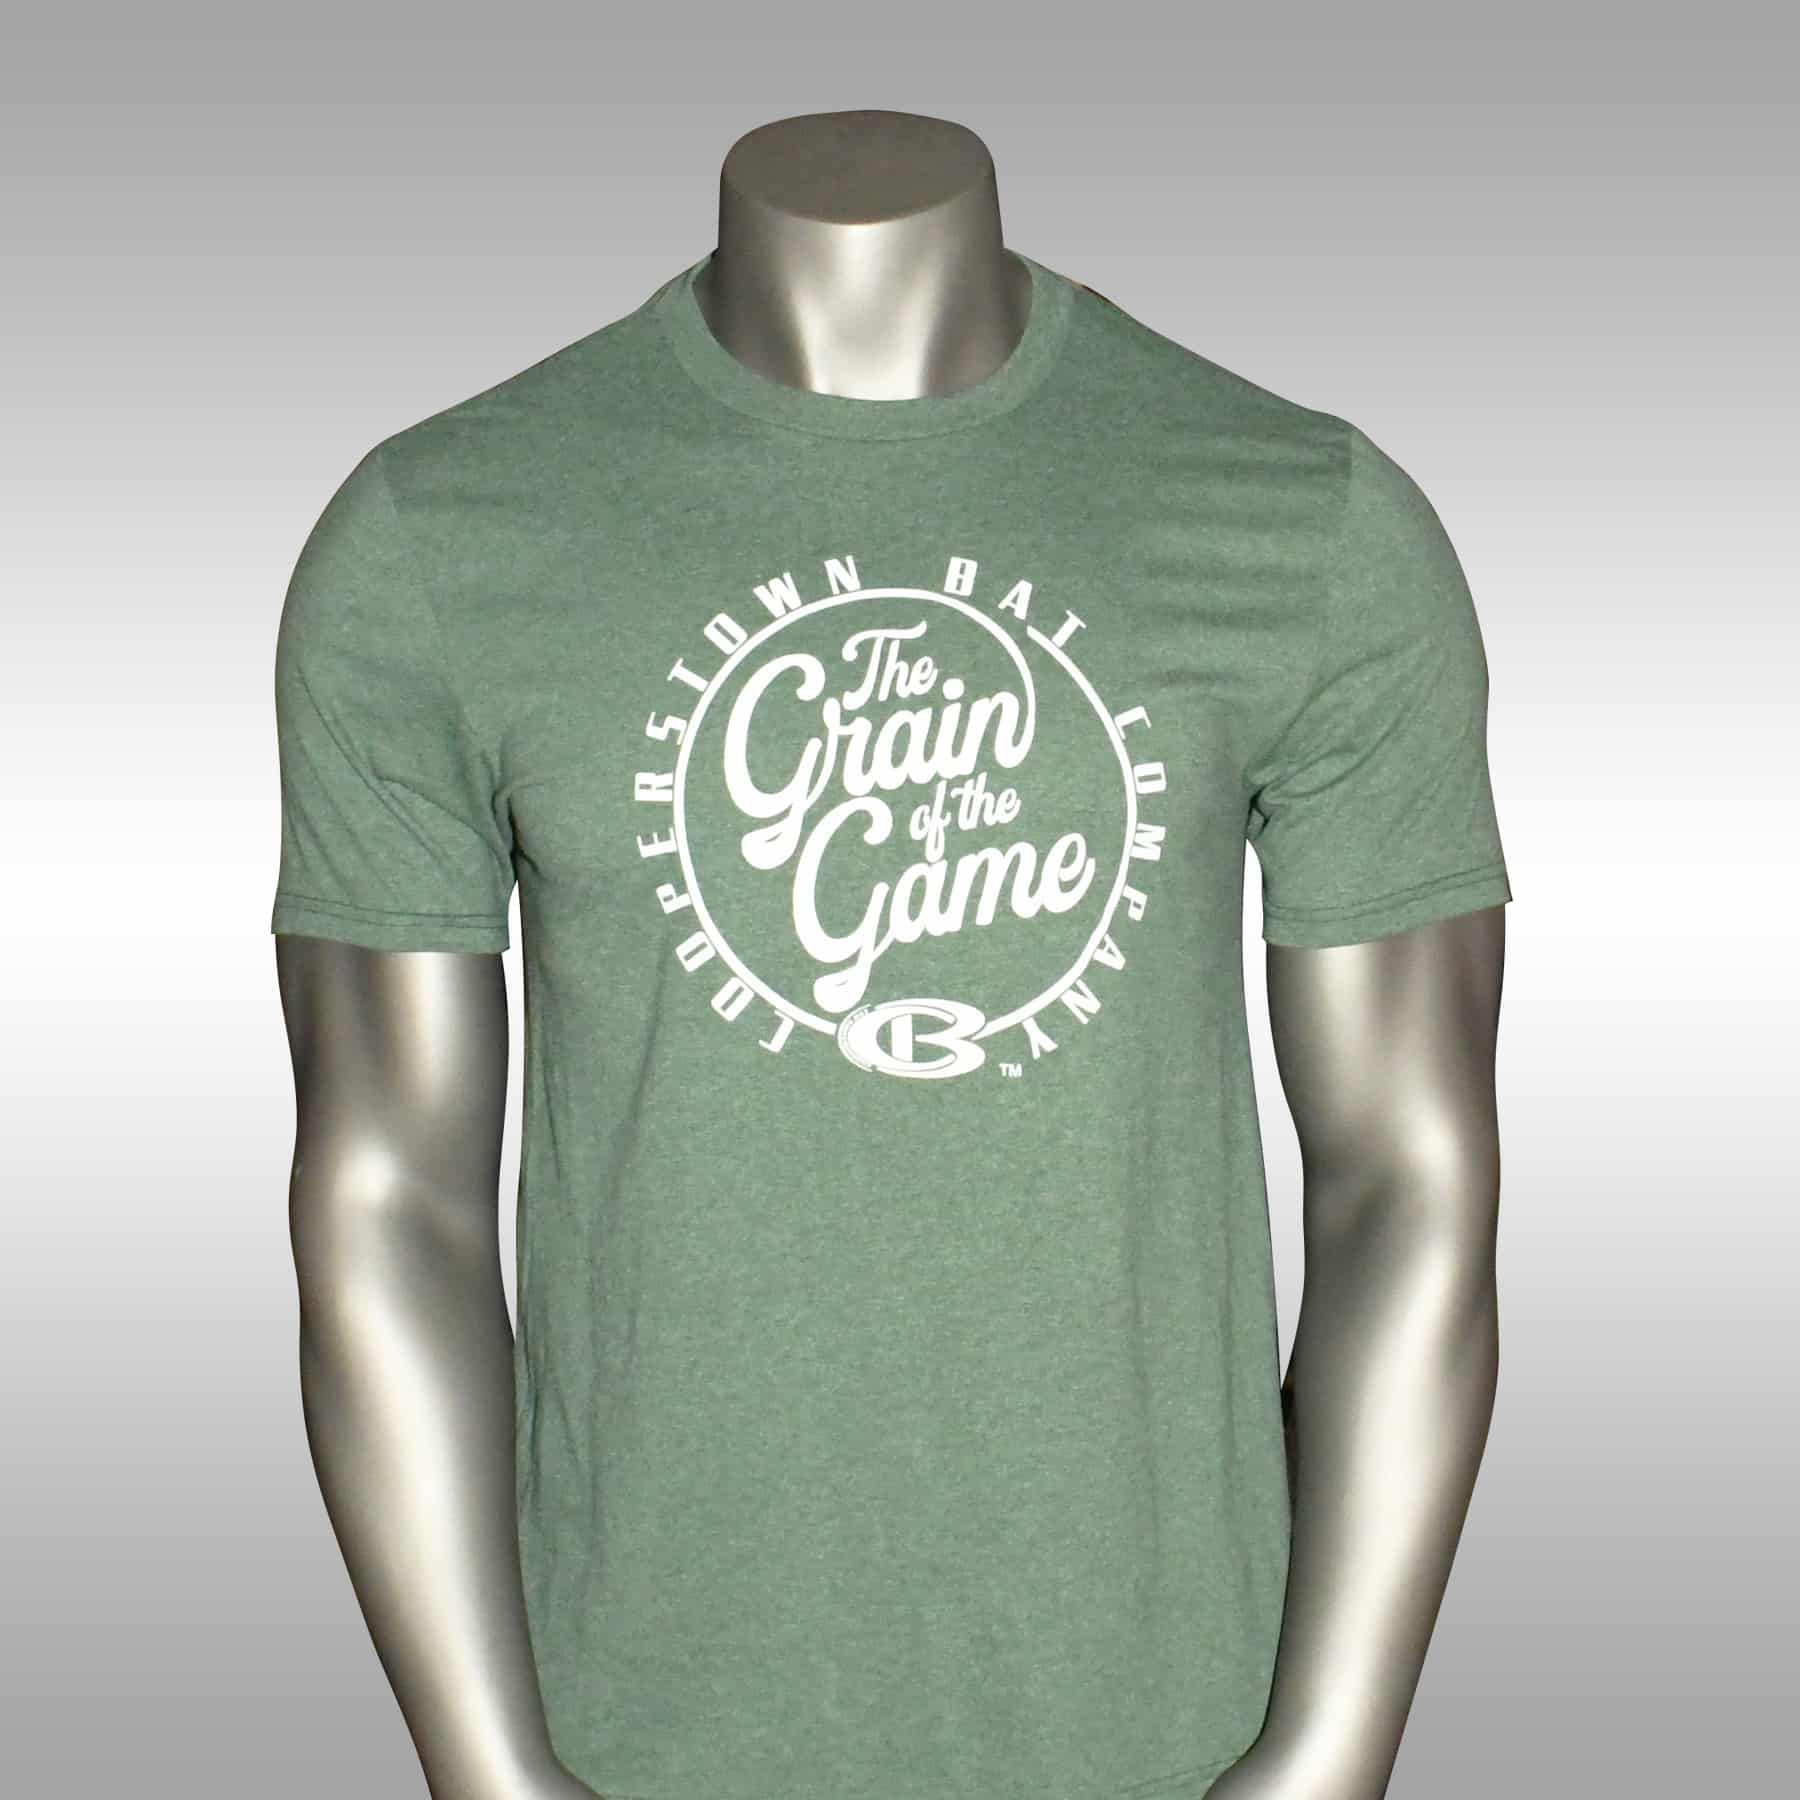 Cooperstown Bat Grain of the Game t-shirt